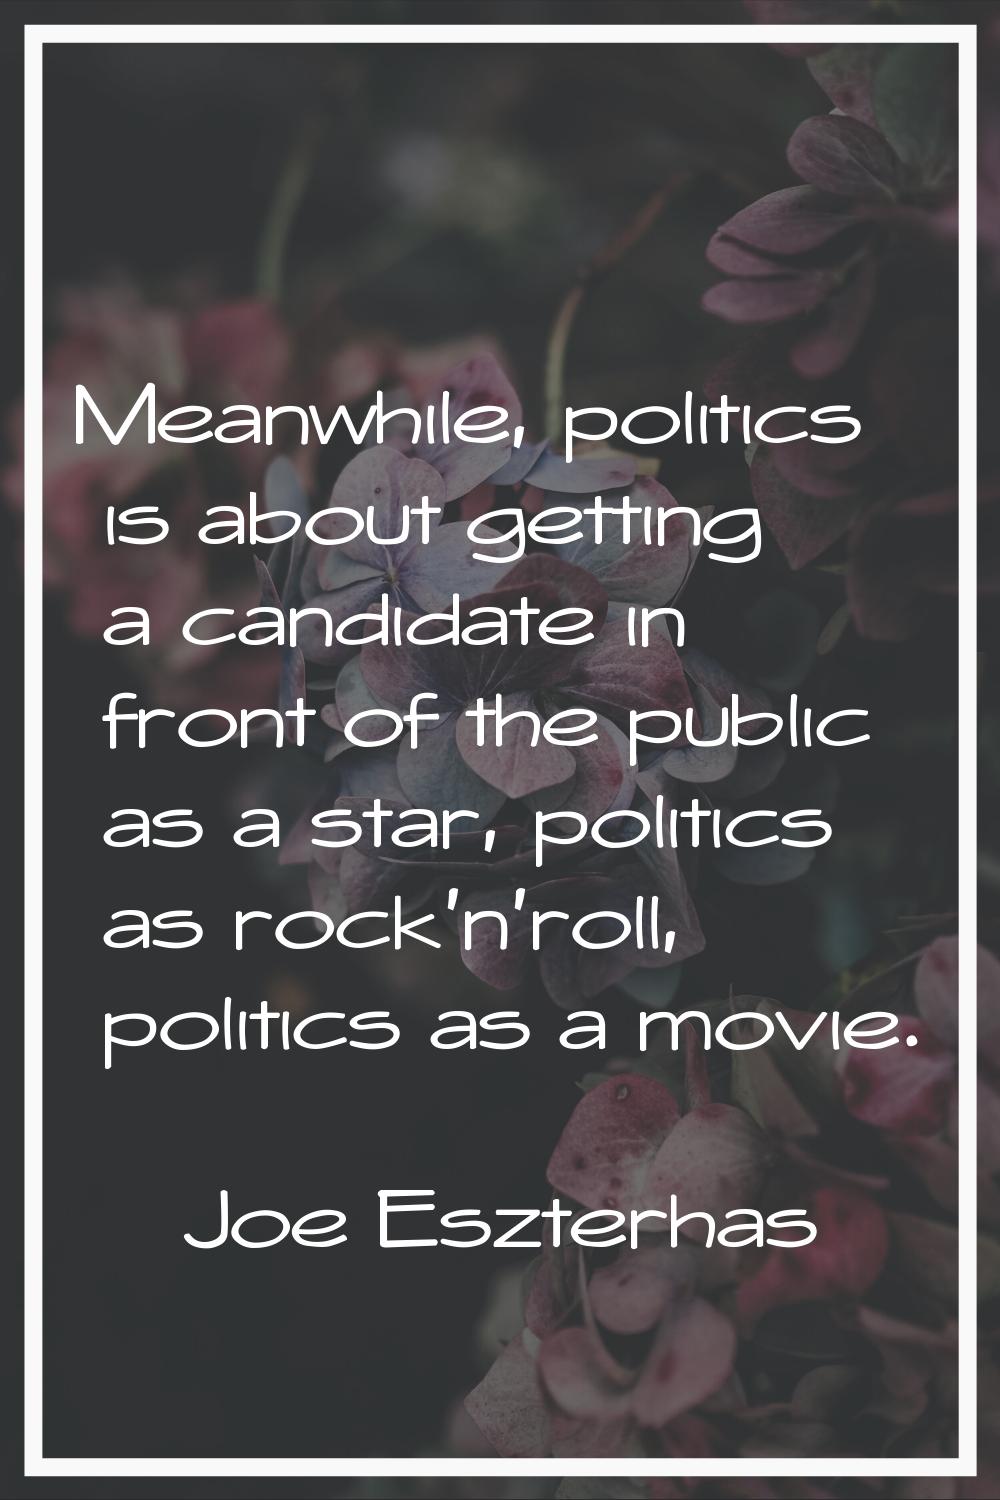 Meanwhile, politics is about getting a candidate in front of the public as a star, politics as rock